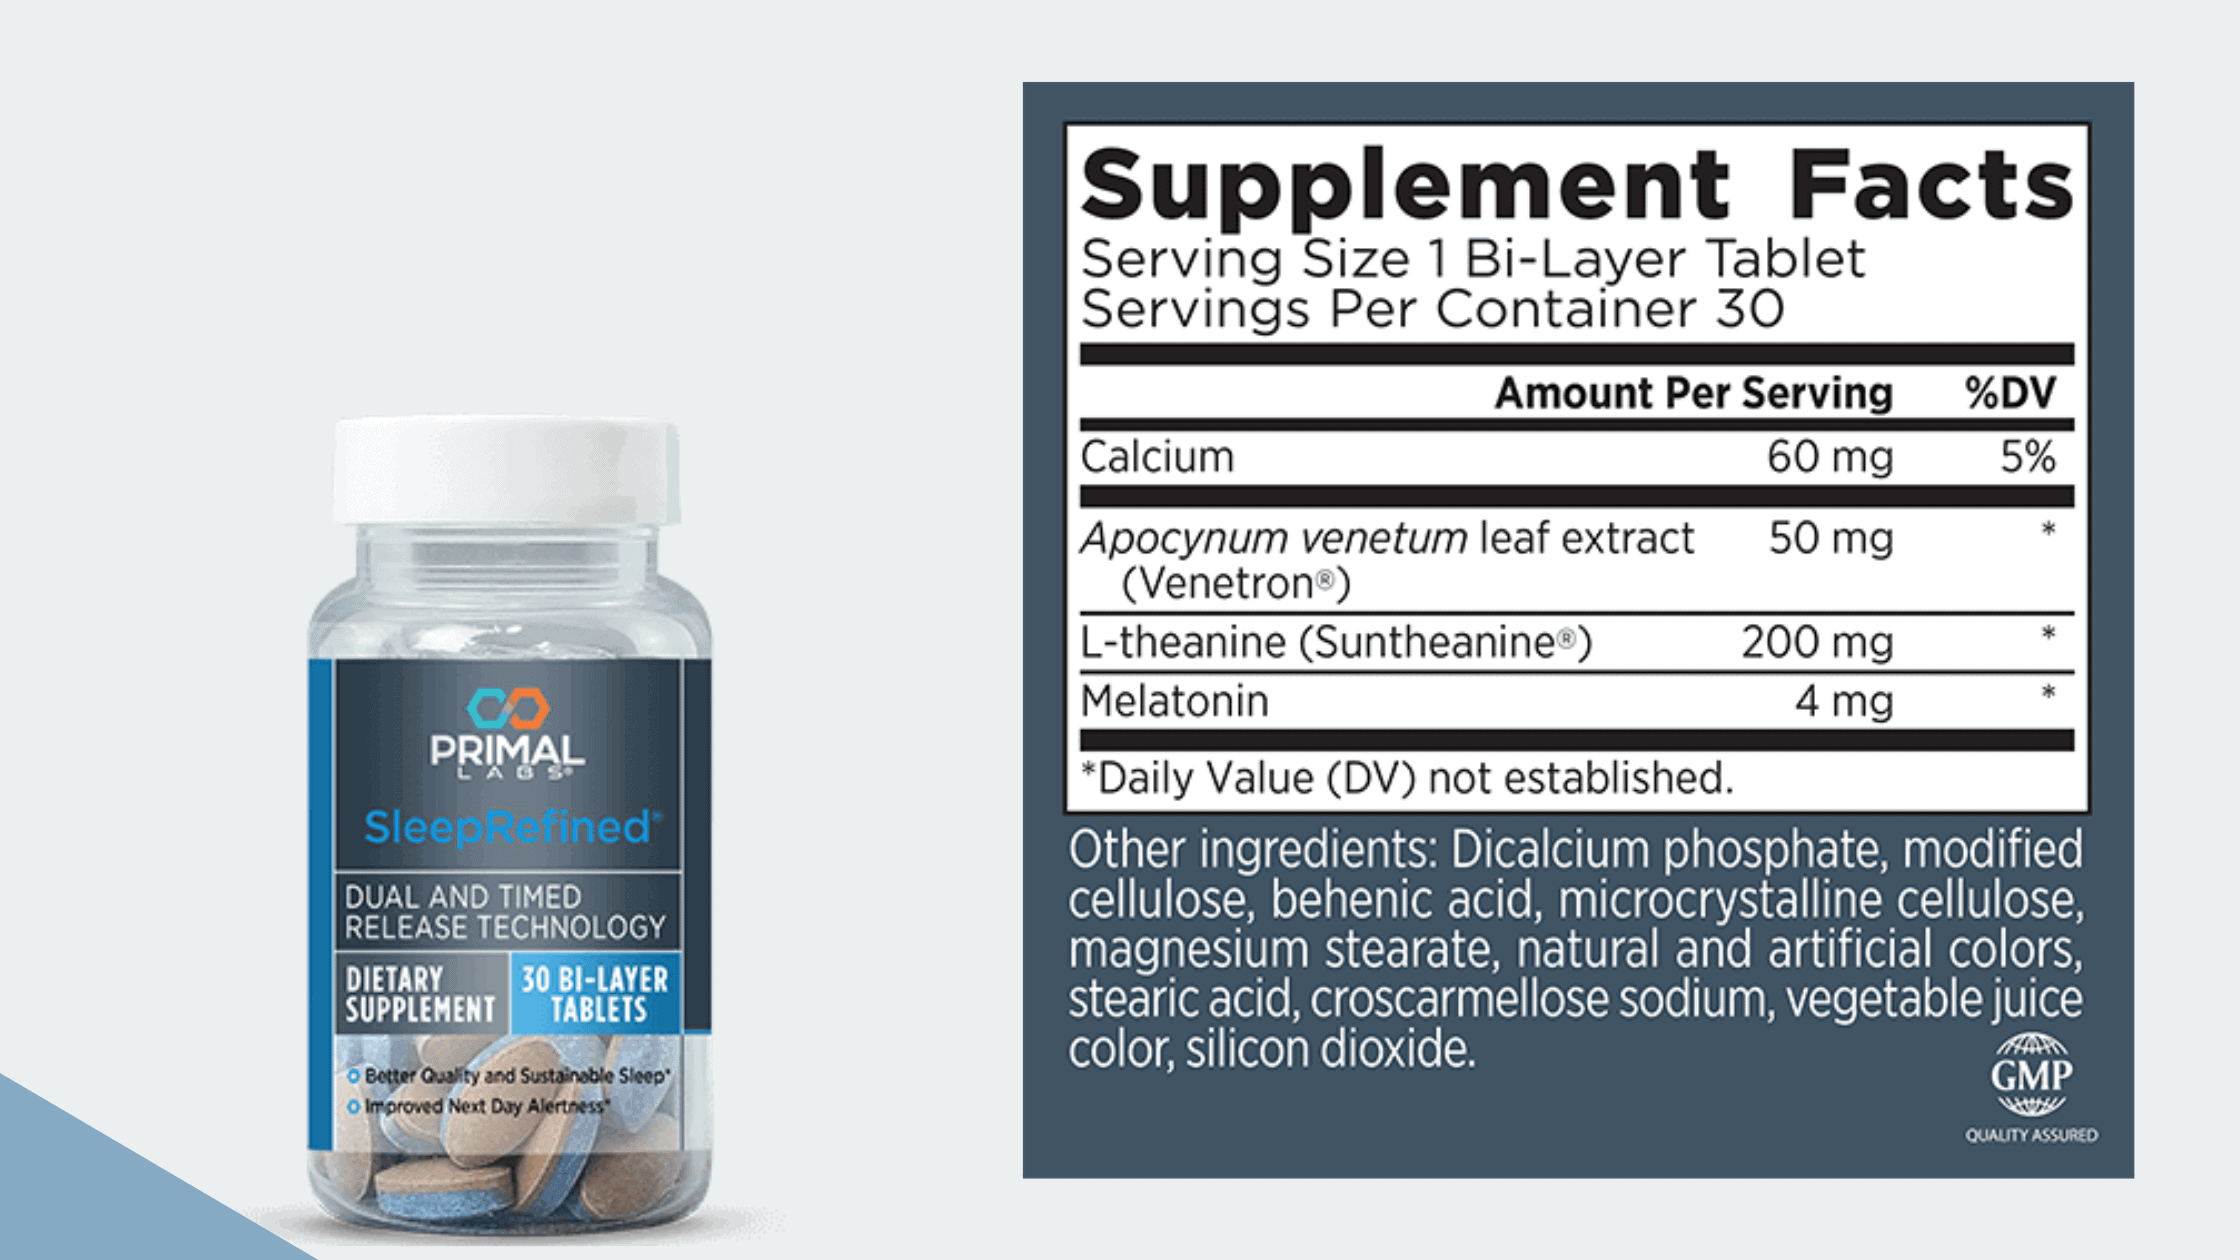 Primal Labs Sleep Refined supplement facts